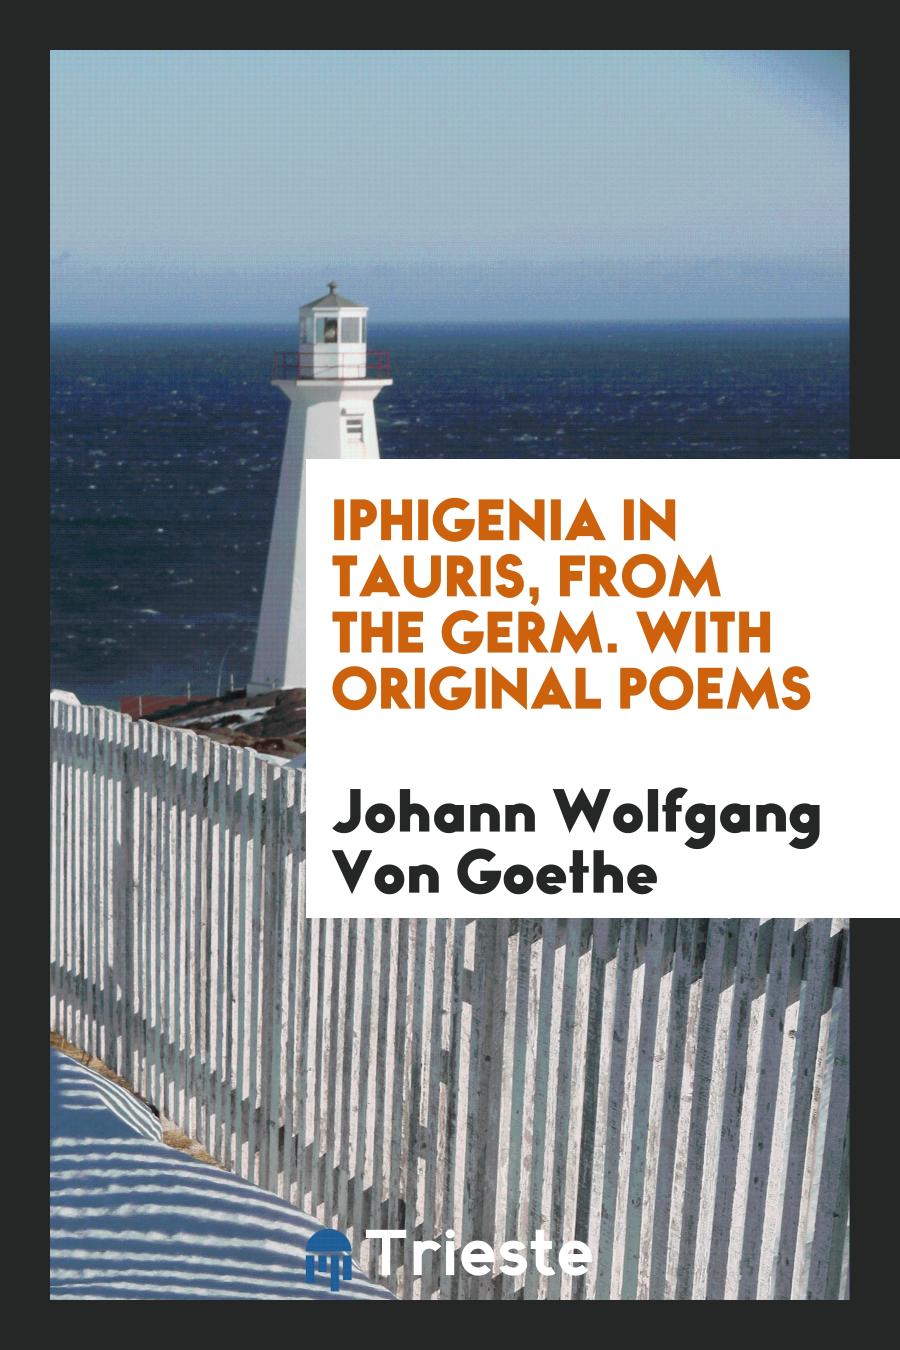 Iphigenia in Tauris, from the Germ. With Original Poems